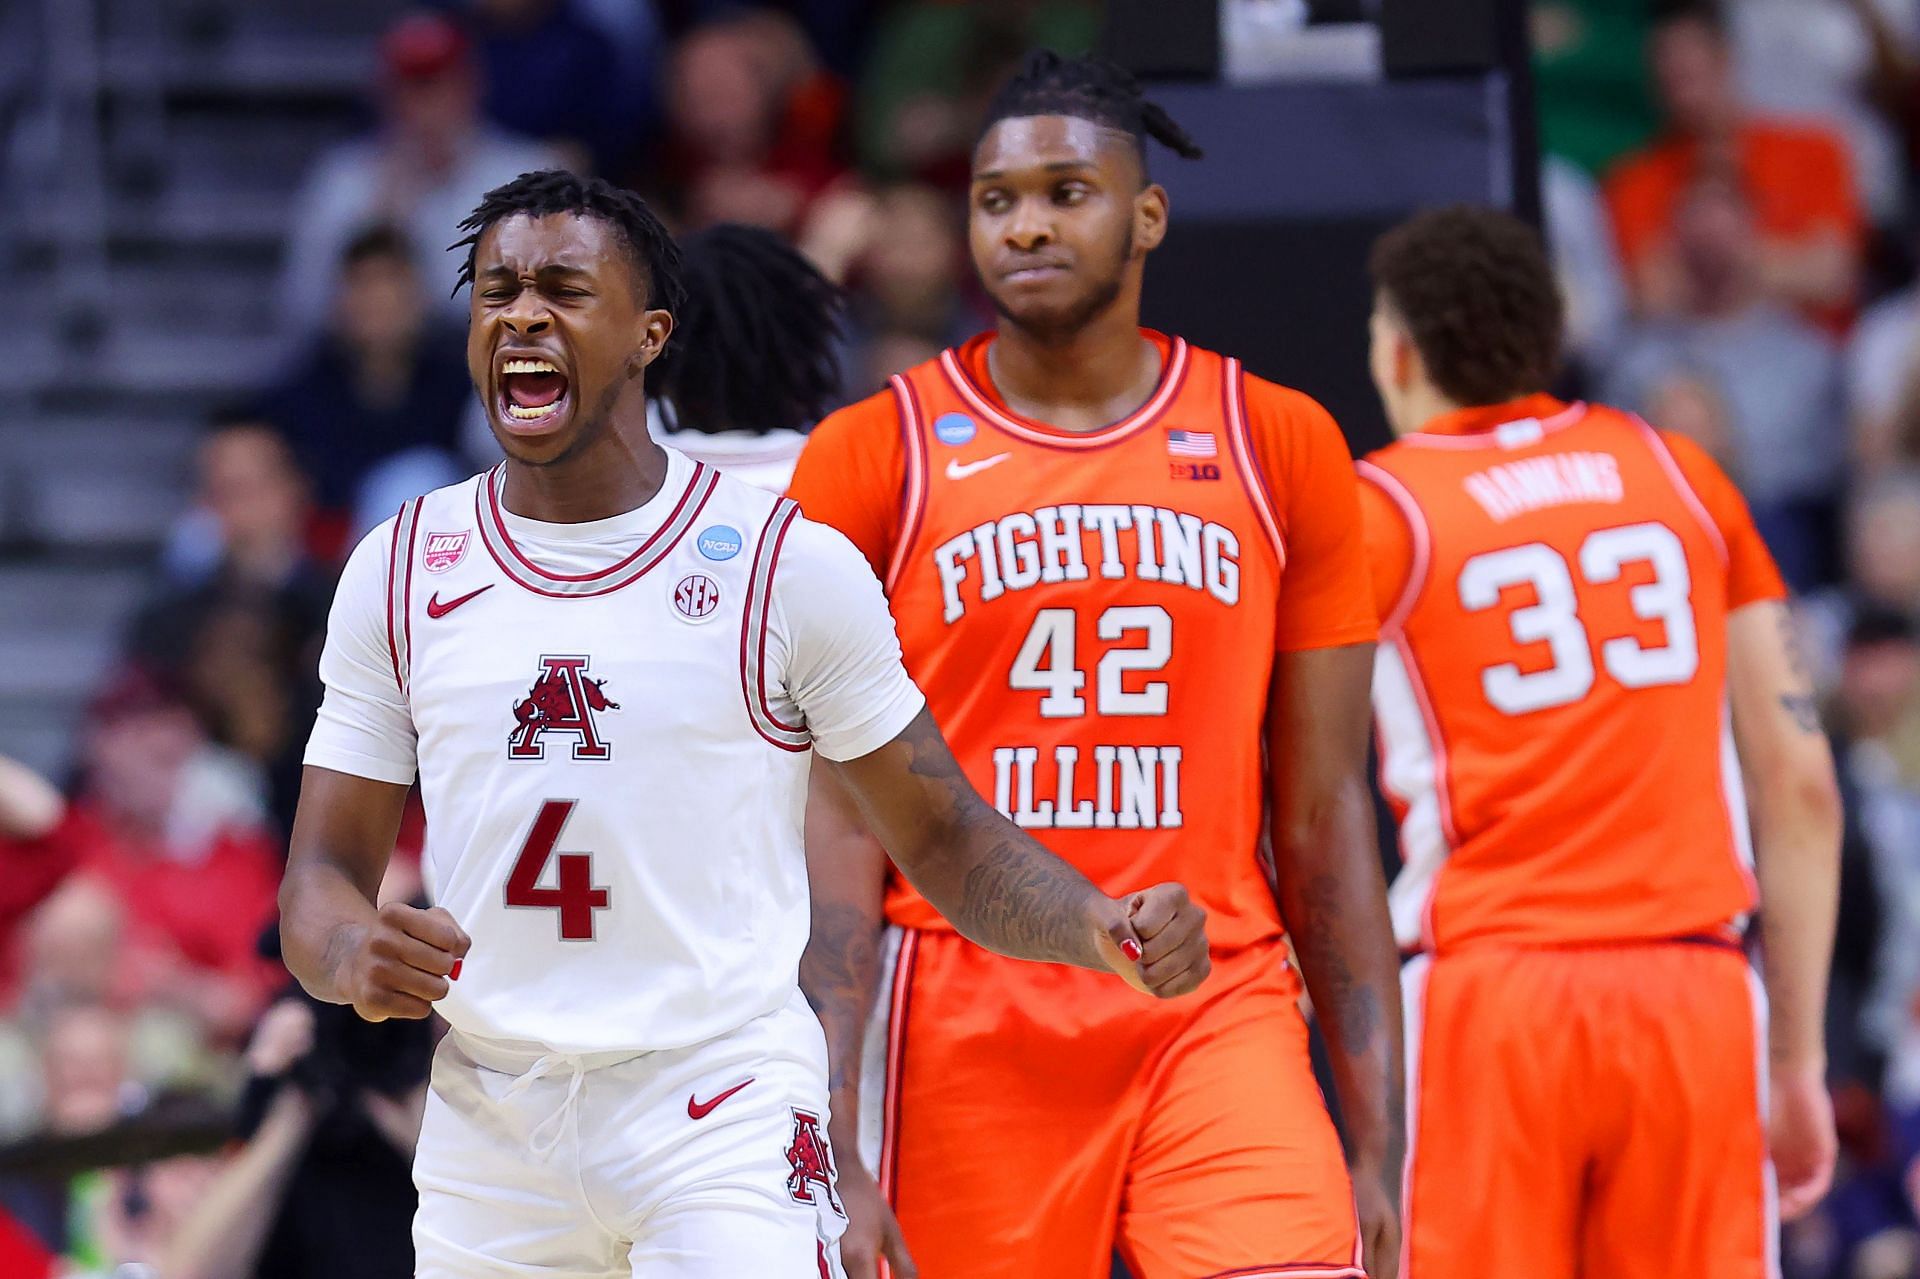 The Razorbacks will face a tough opponent after beating Illinois (Image via Getty Images)